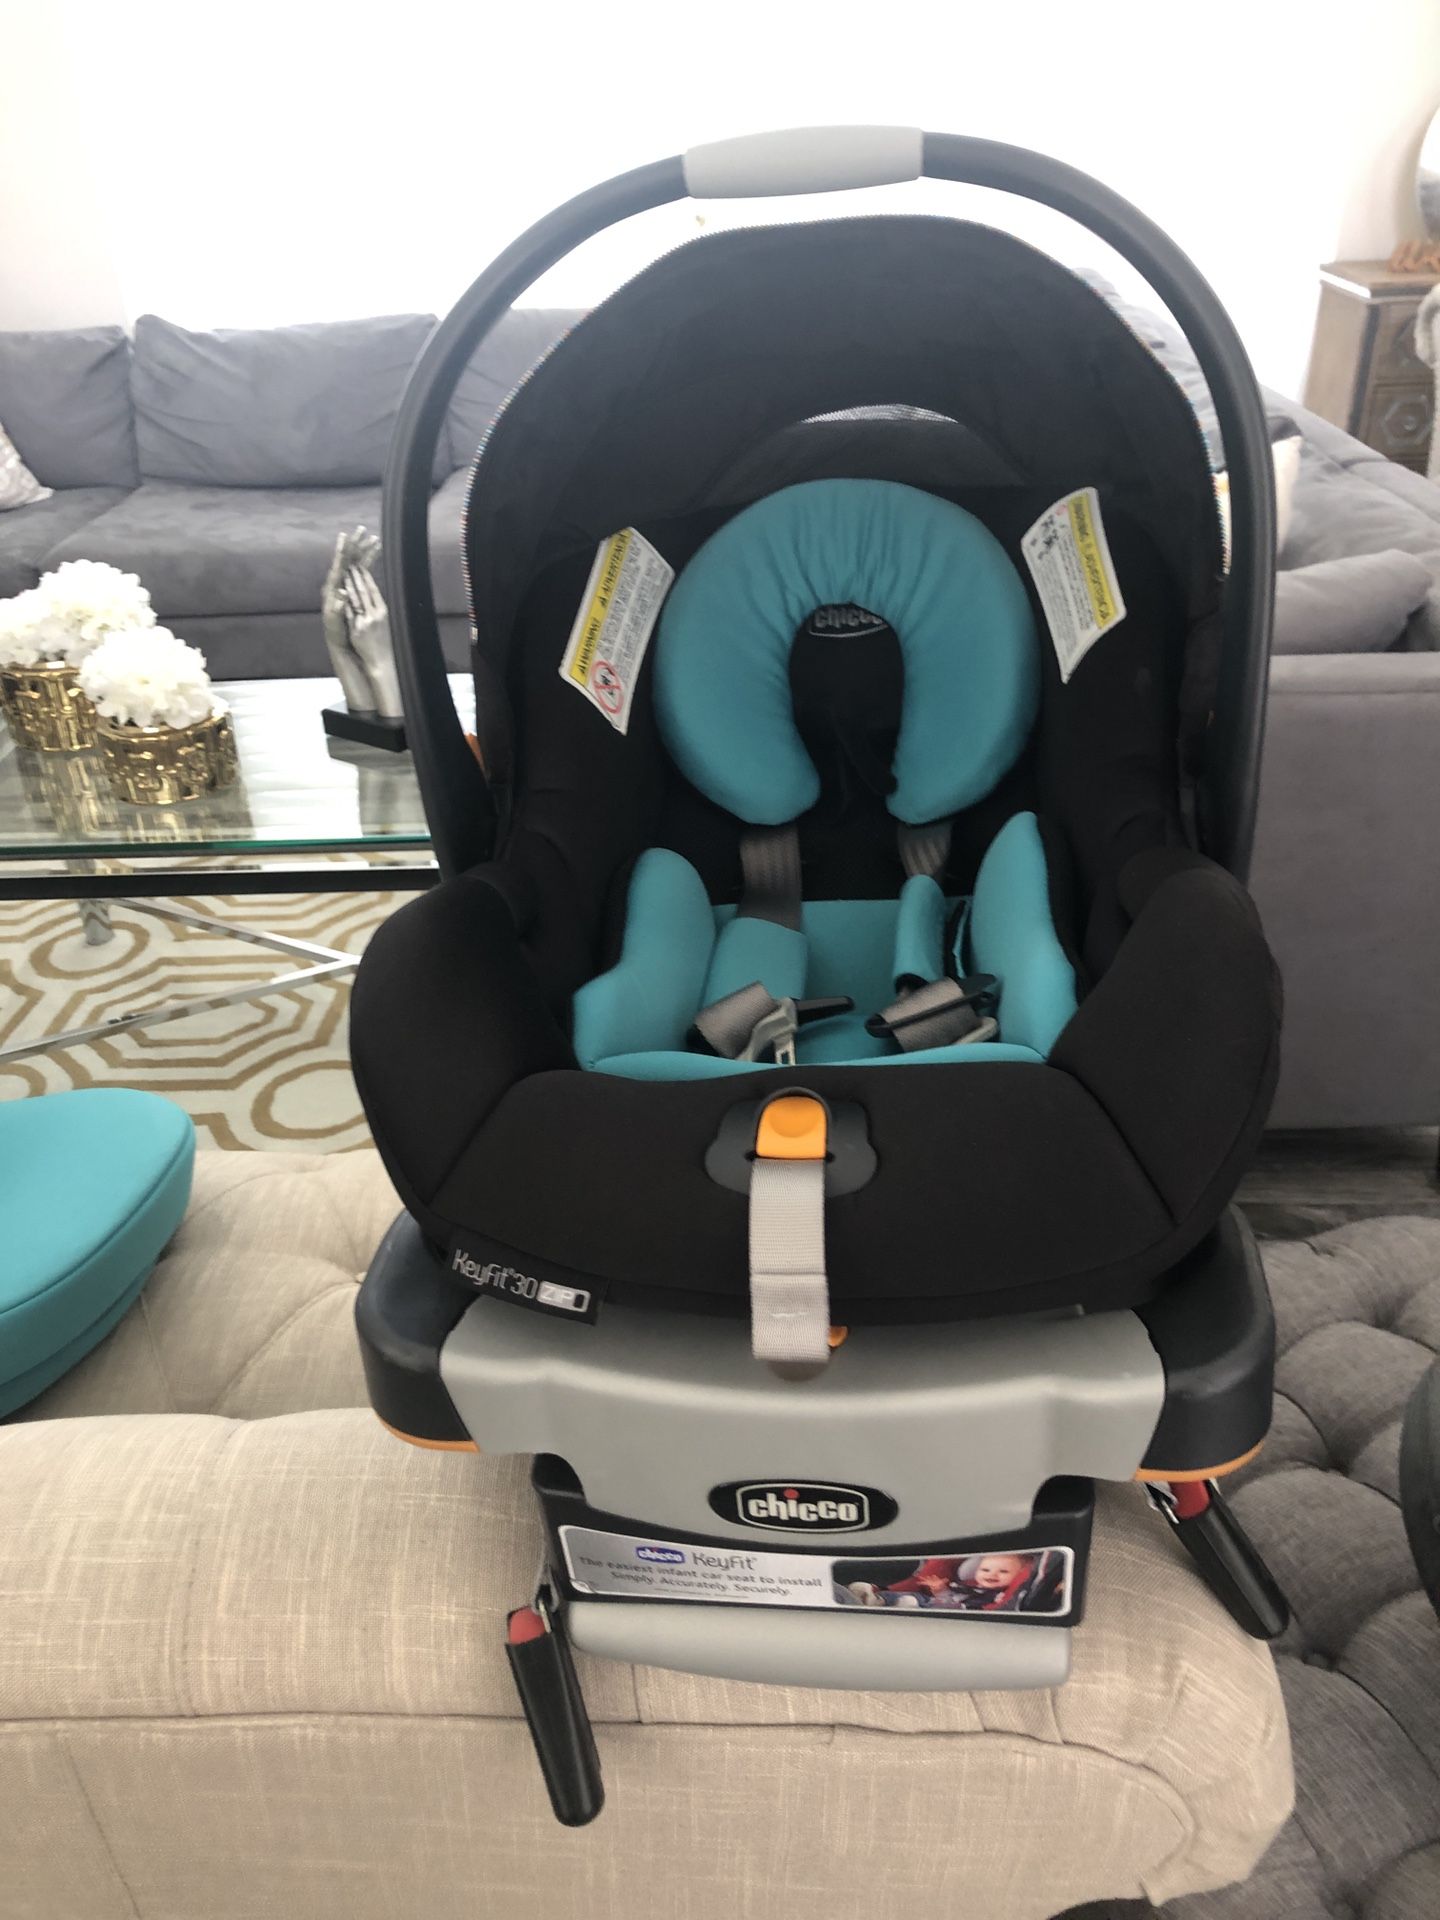 Chicco keyfit 30 car seat, 2 bases, and winter cover. Can be sold separately